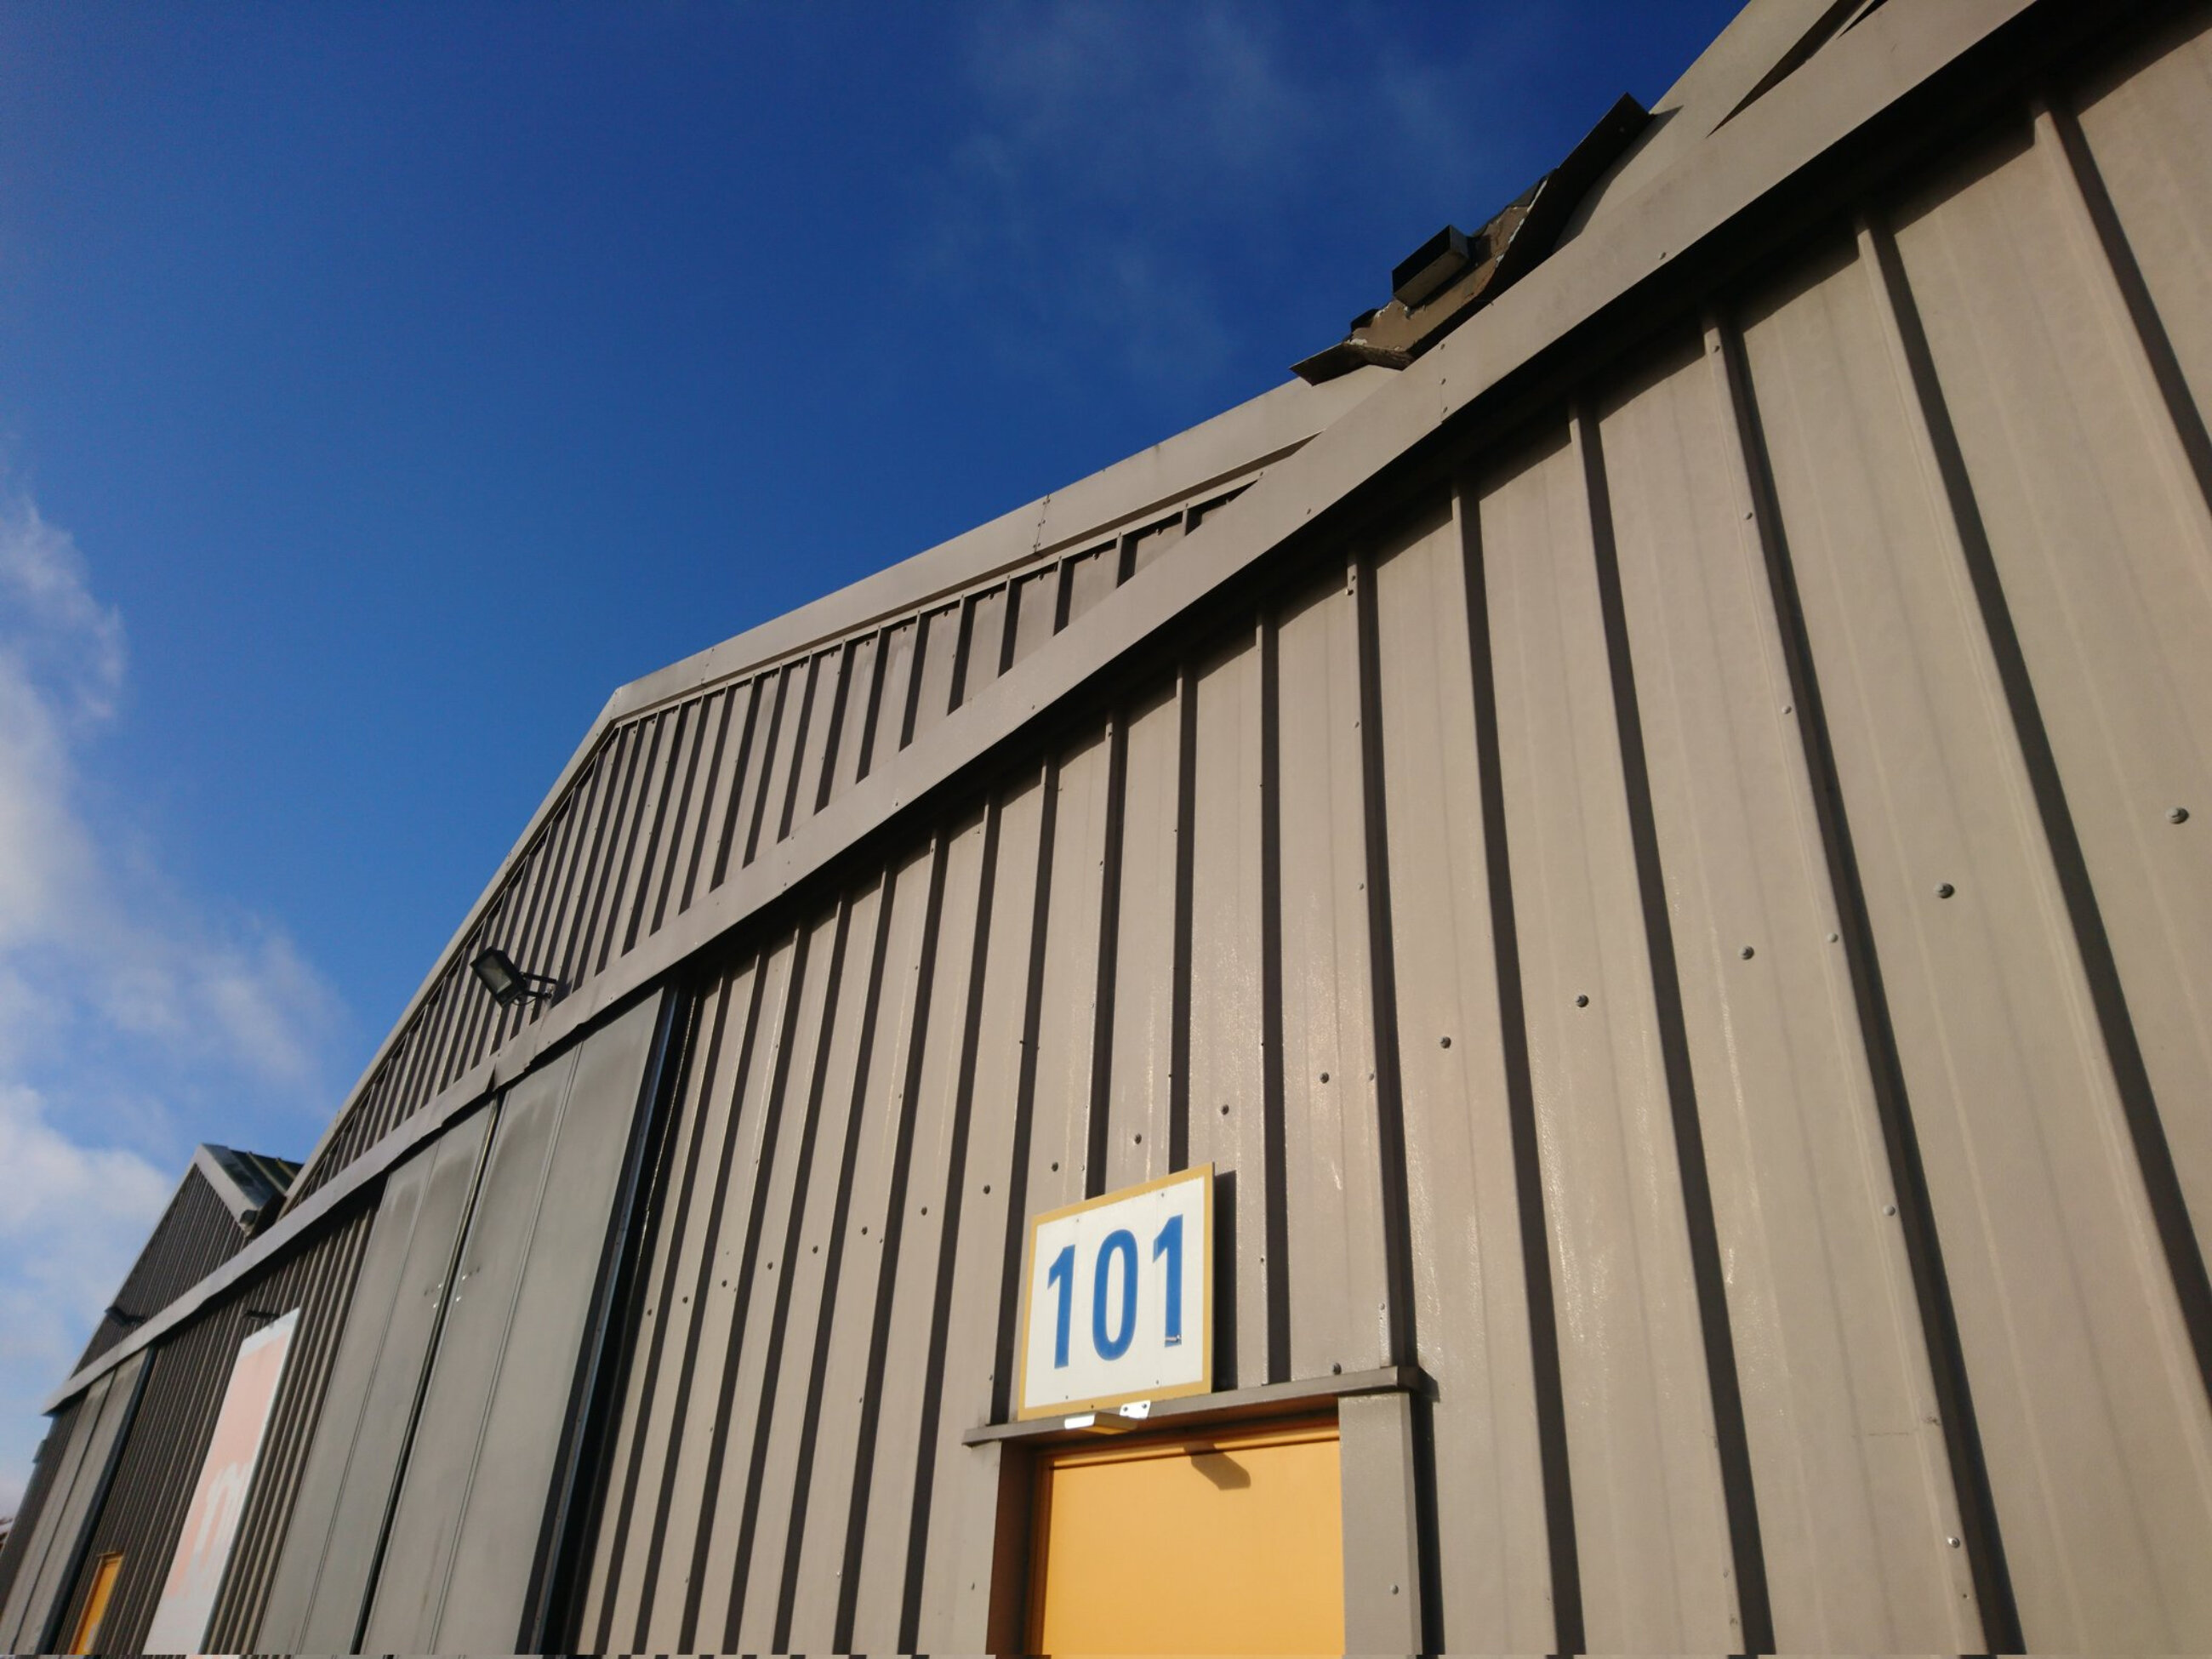 Facade of 101 facility, a grey warehouse with an orange door and 101 sign above the entrance